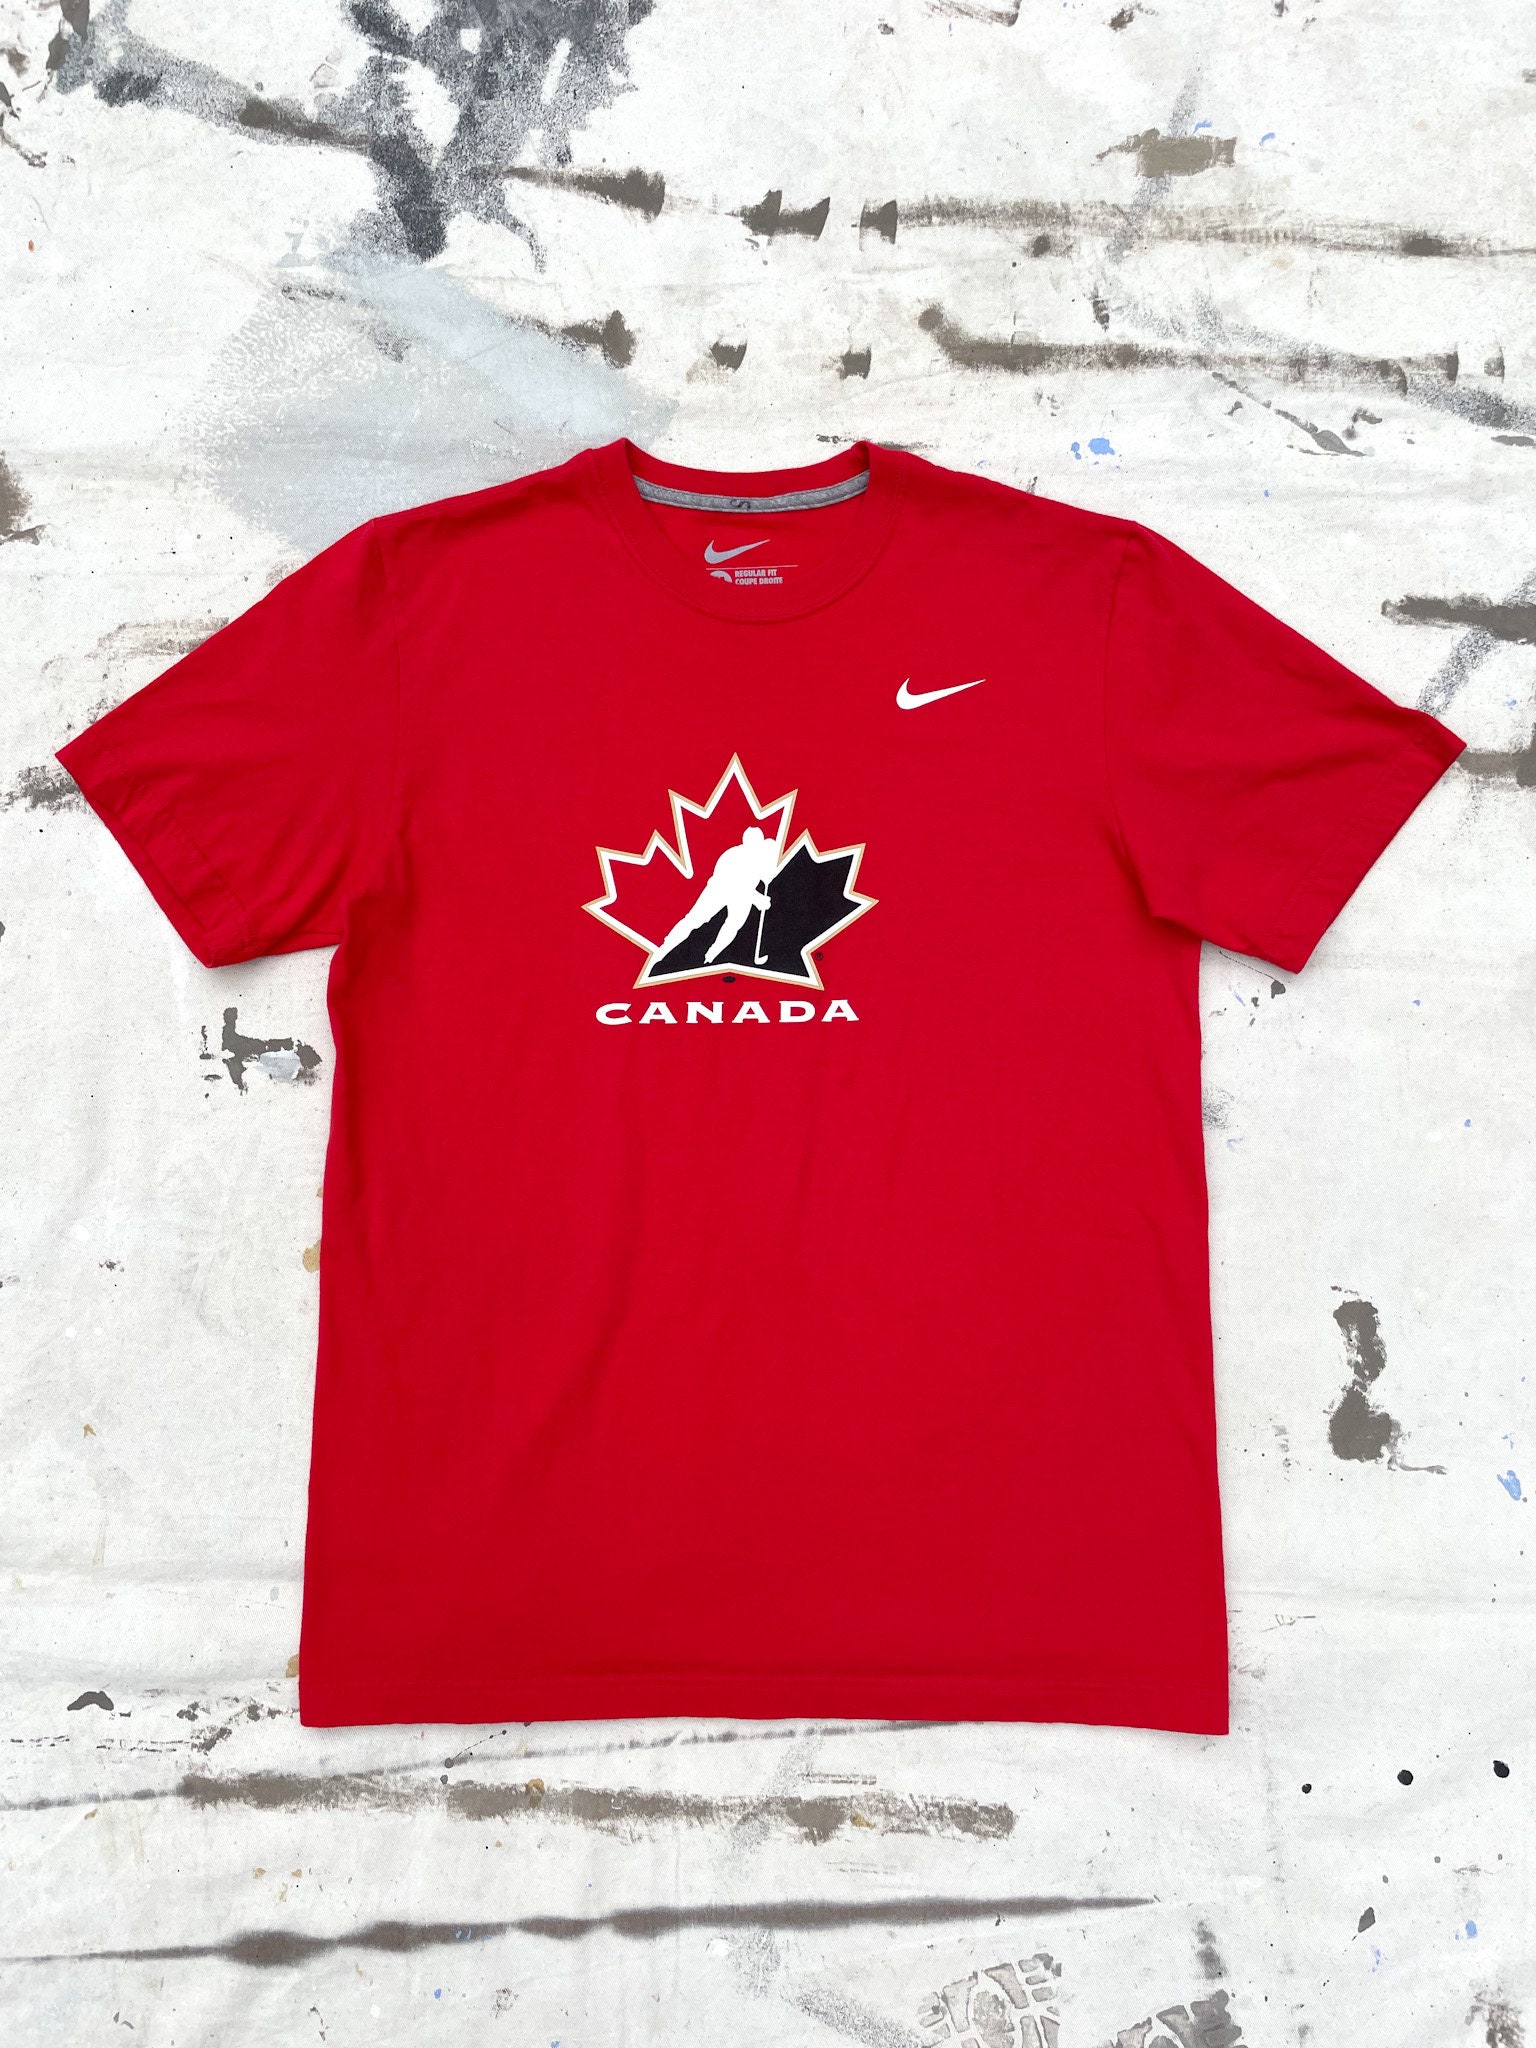 Nike Bauer Team Canada Hockey Jersey Home Red Long Sleeve Youth L/XL